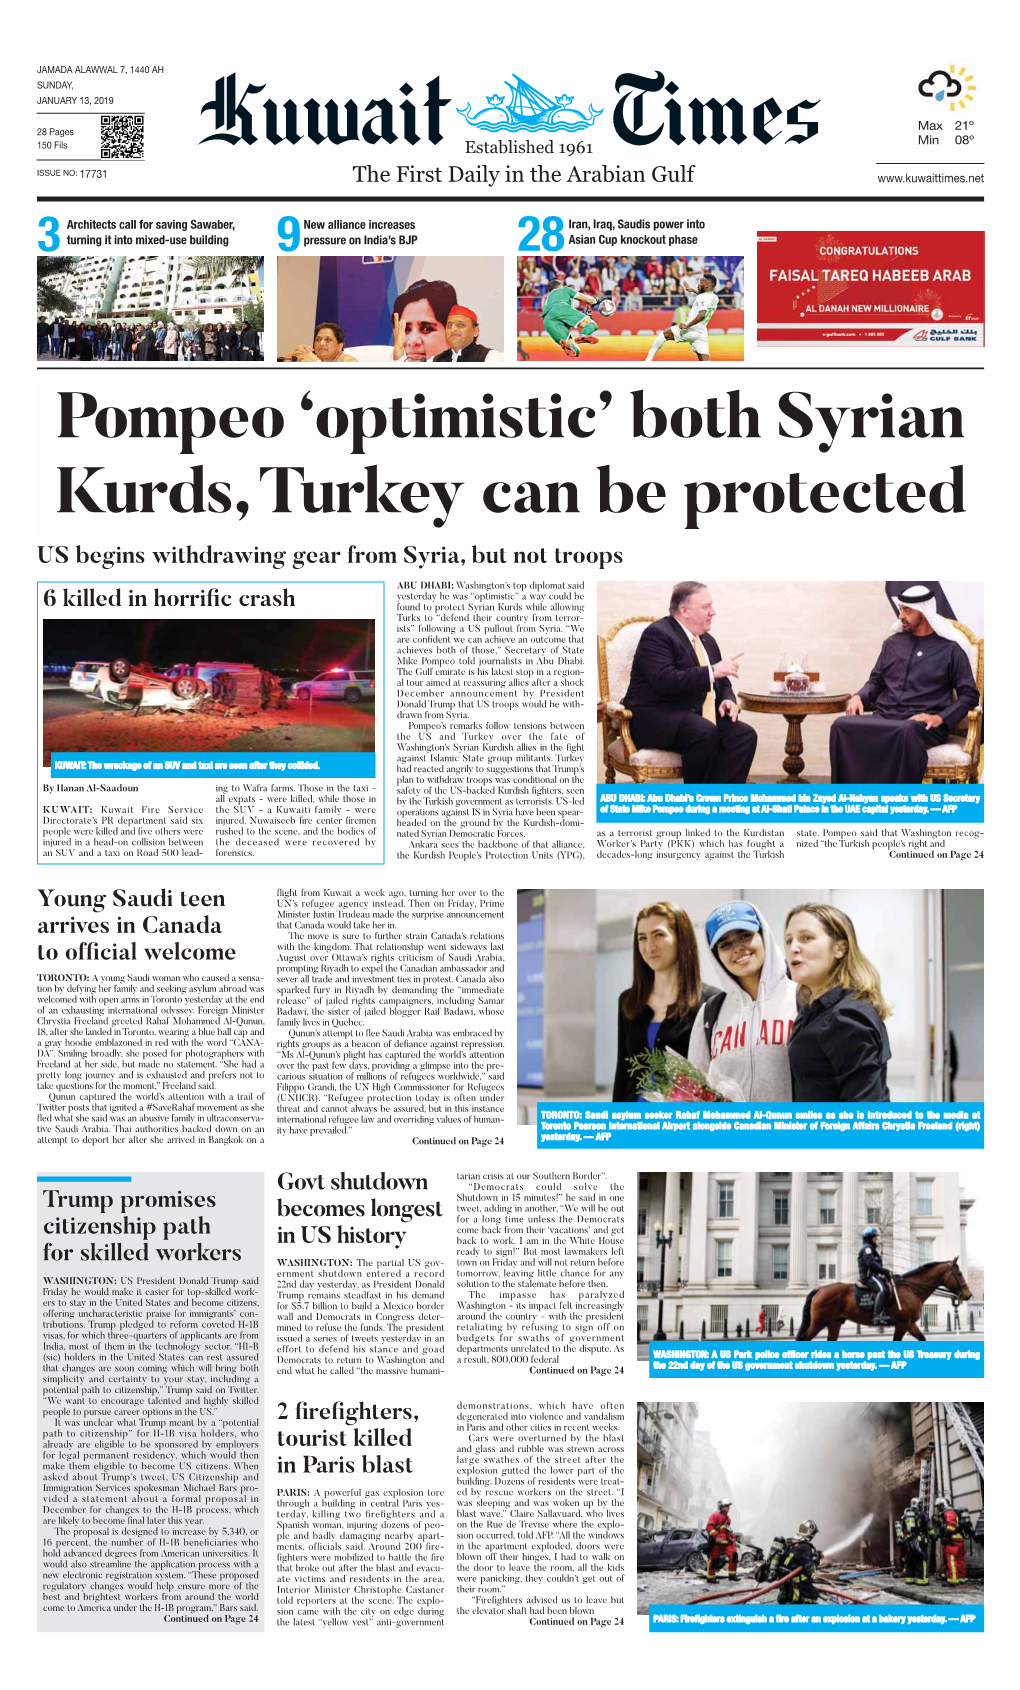 Pompeo ‘Optimistic’ Both Syrian Kurds, Turkey Can Be Protected